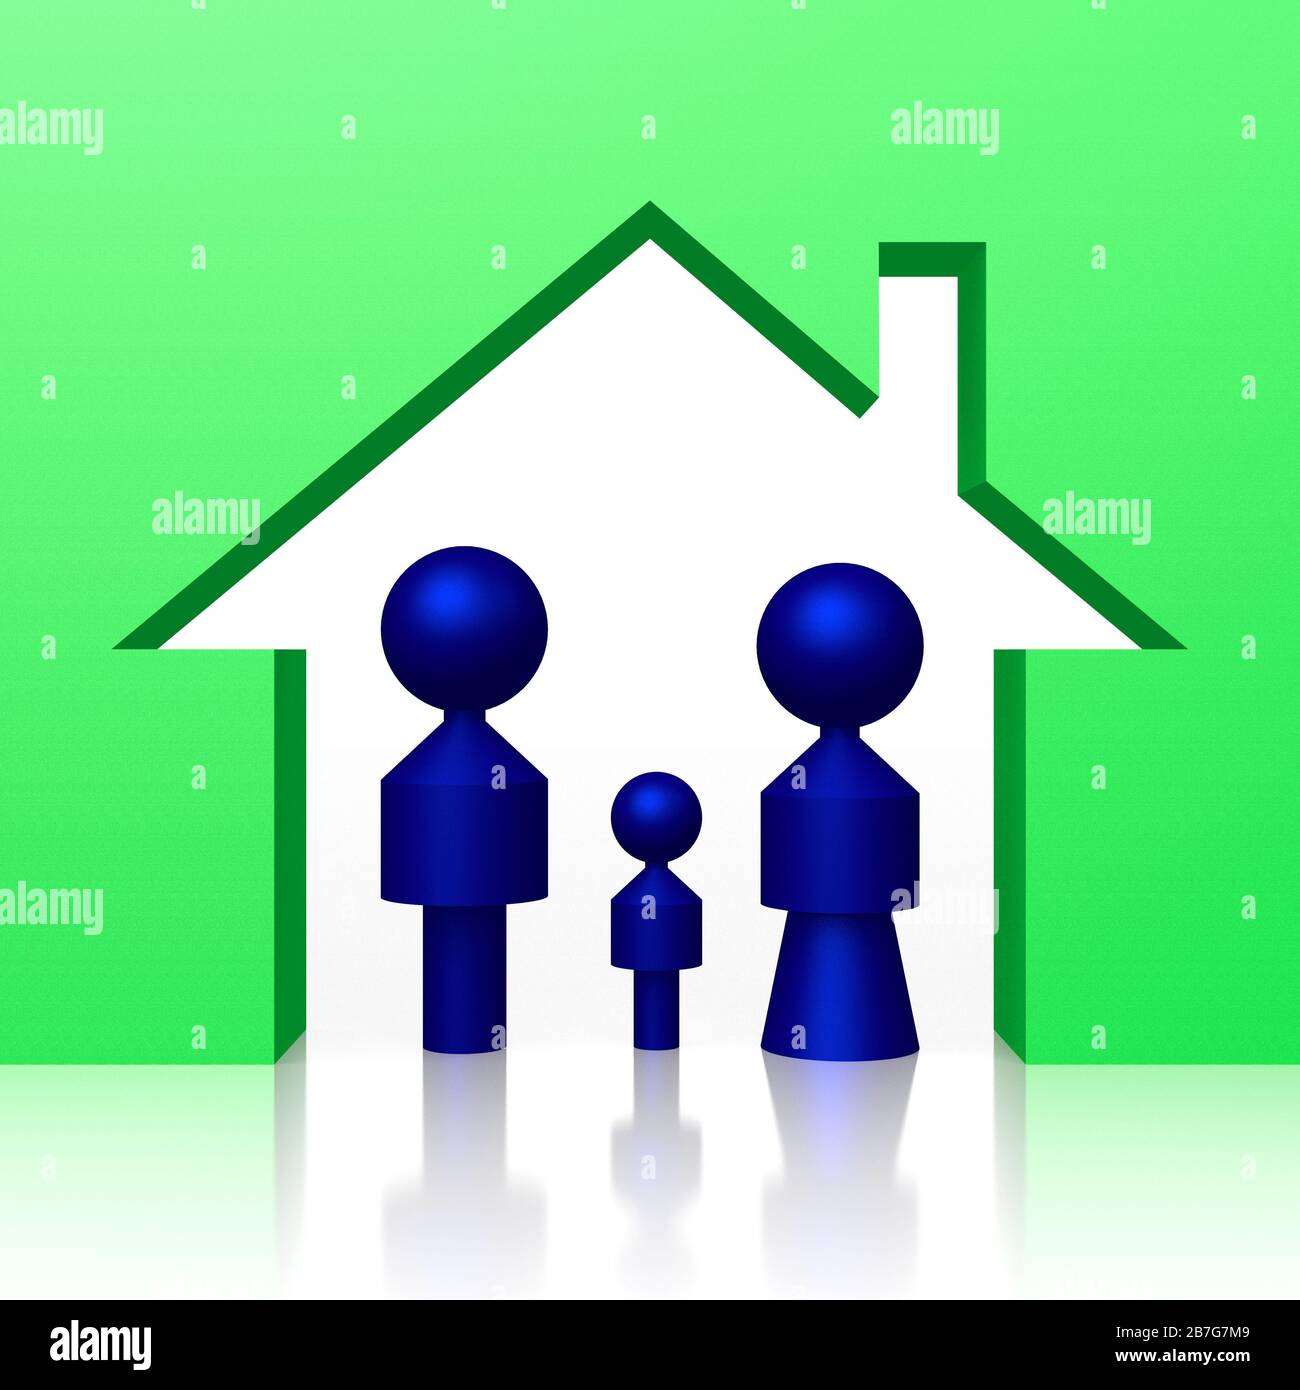 3D geometrical house and family shapes Stock Photo